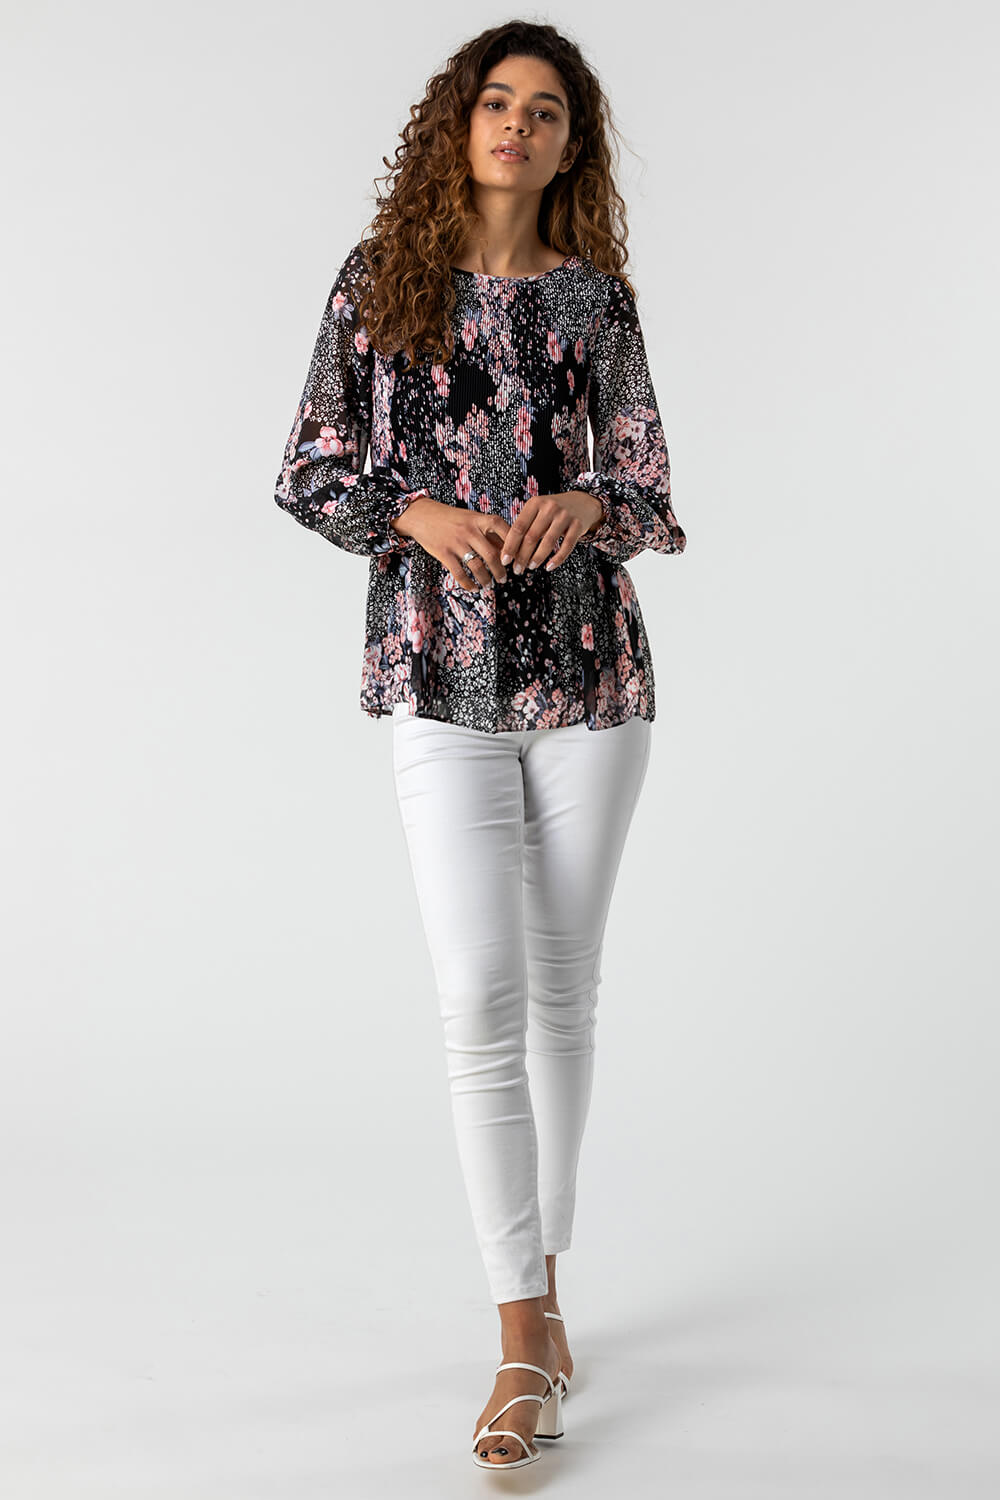 PINK Floral Print Pleated Top, Image 3 of 4